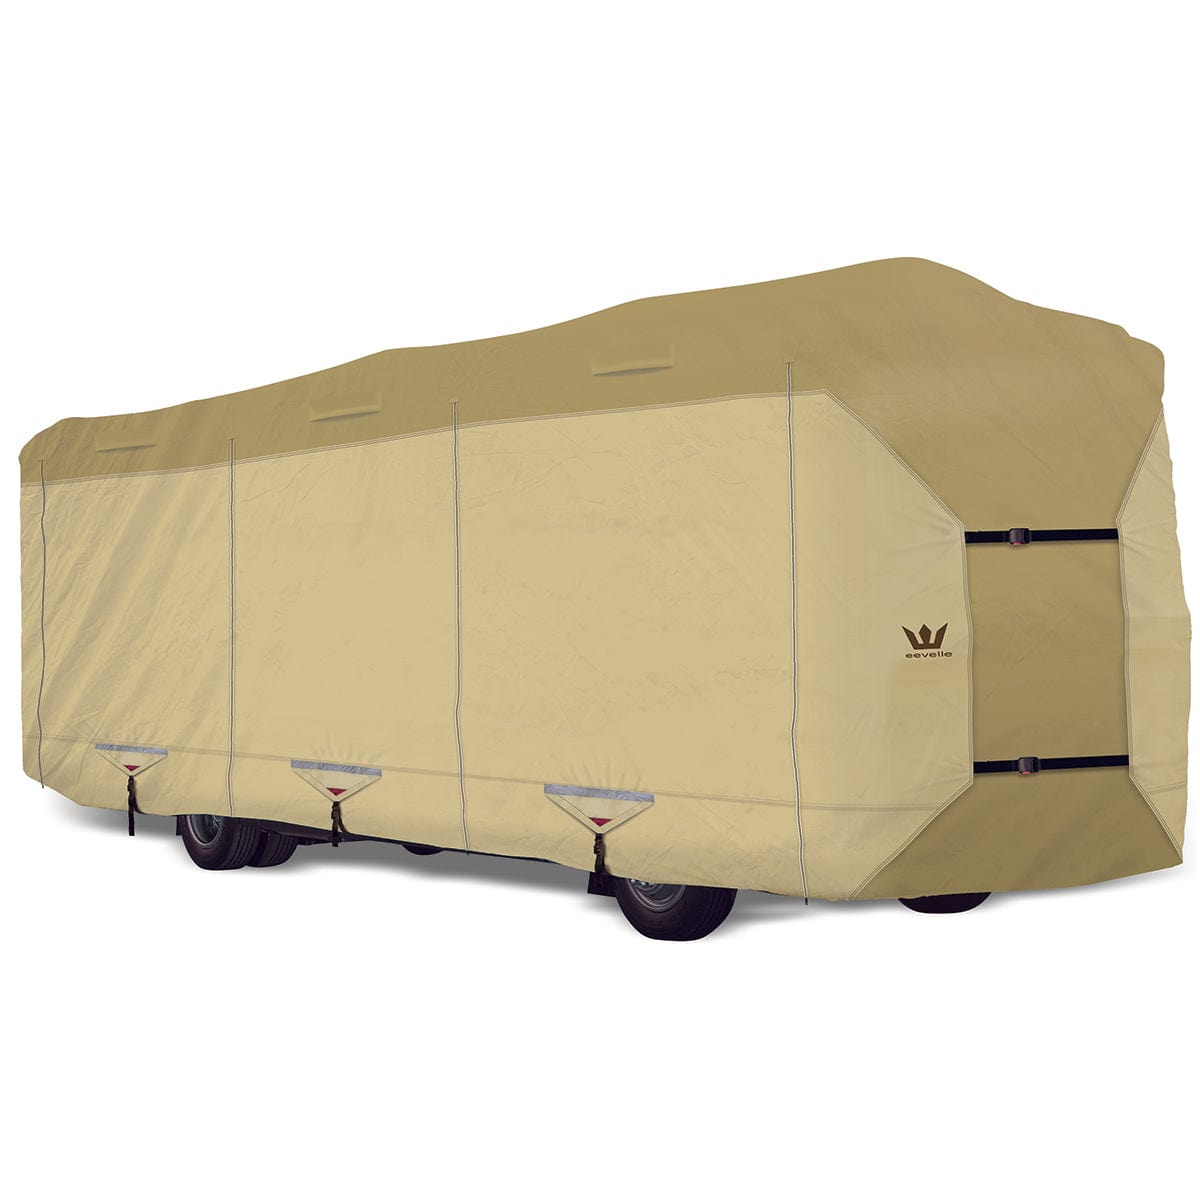 S2 Expedition by Eevelle Class A RV Cover / Sizes from 27' up to 38' Long